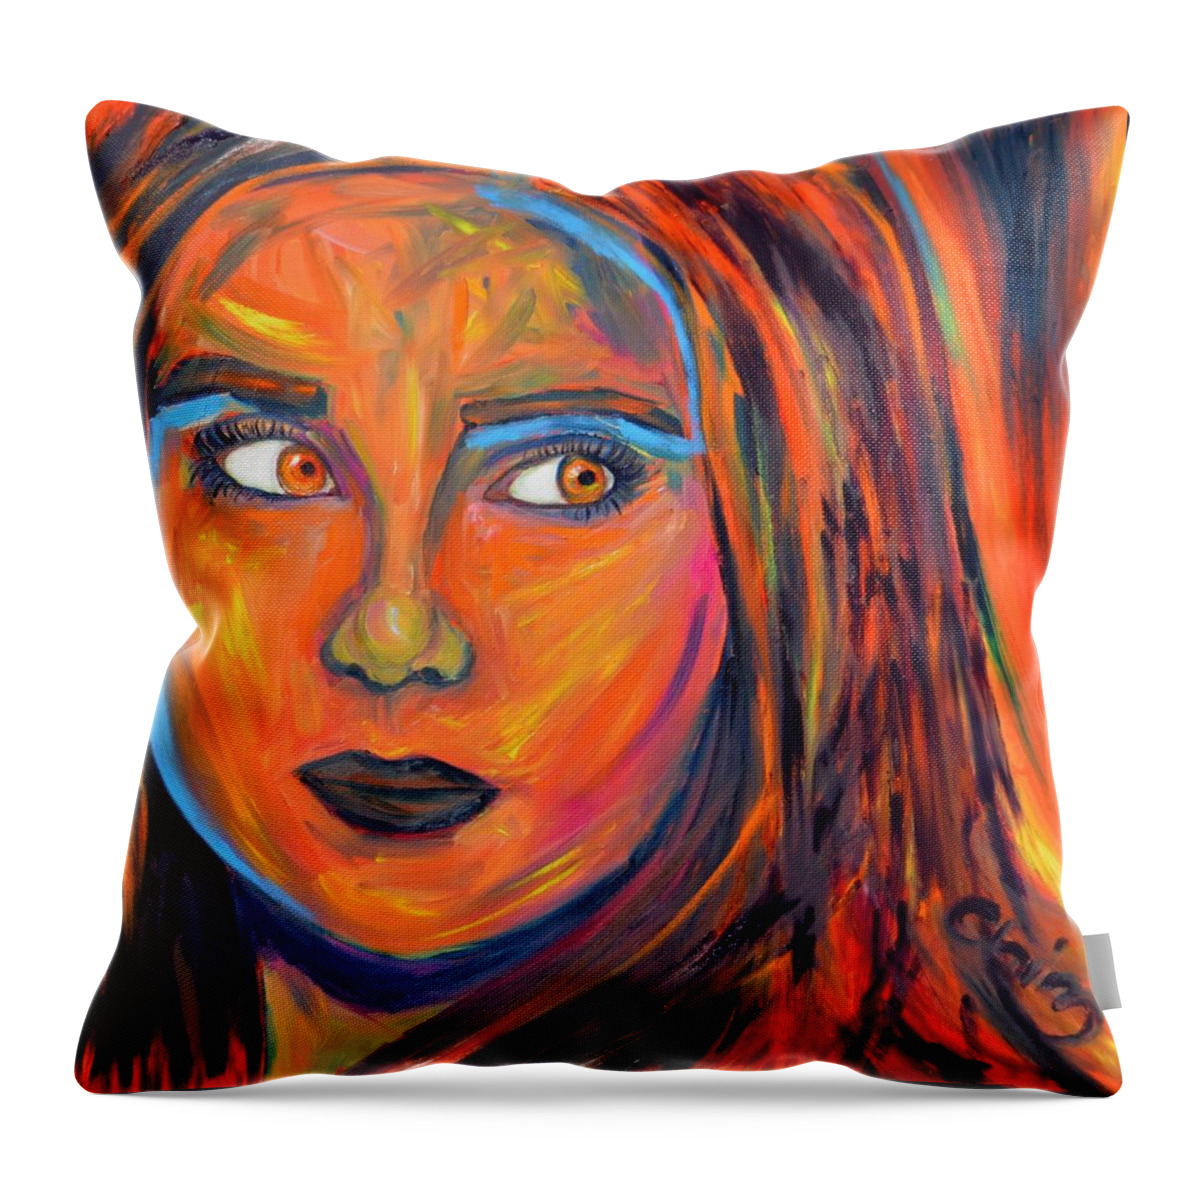 Eye Throw Pillow featuring the painting Topaz by Chiara Magni